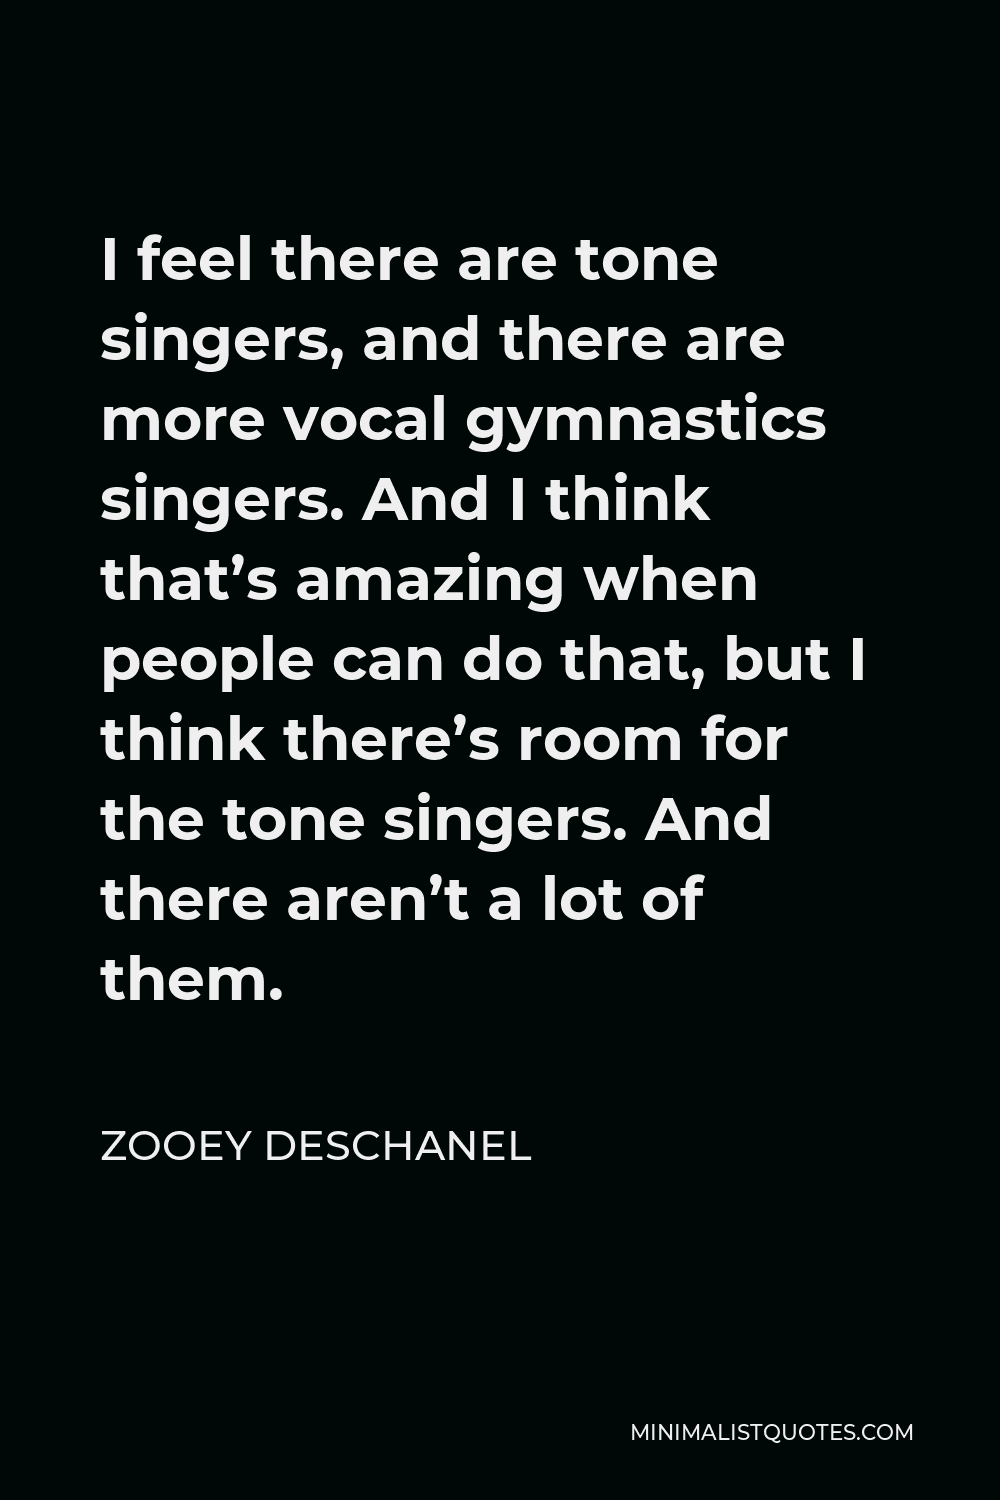 Zooey Deschanel Quote - I feel there are tone singers, and there are more vocal gymnastics singers. And I think that’s amazing when people can do that, but I think there’s room for the tone singers. And there aren’t a lot of them.